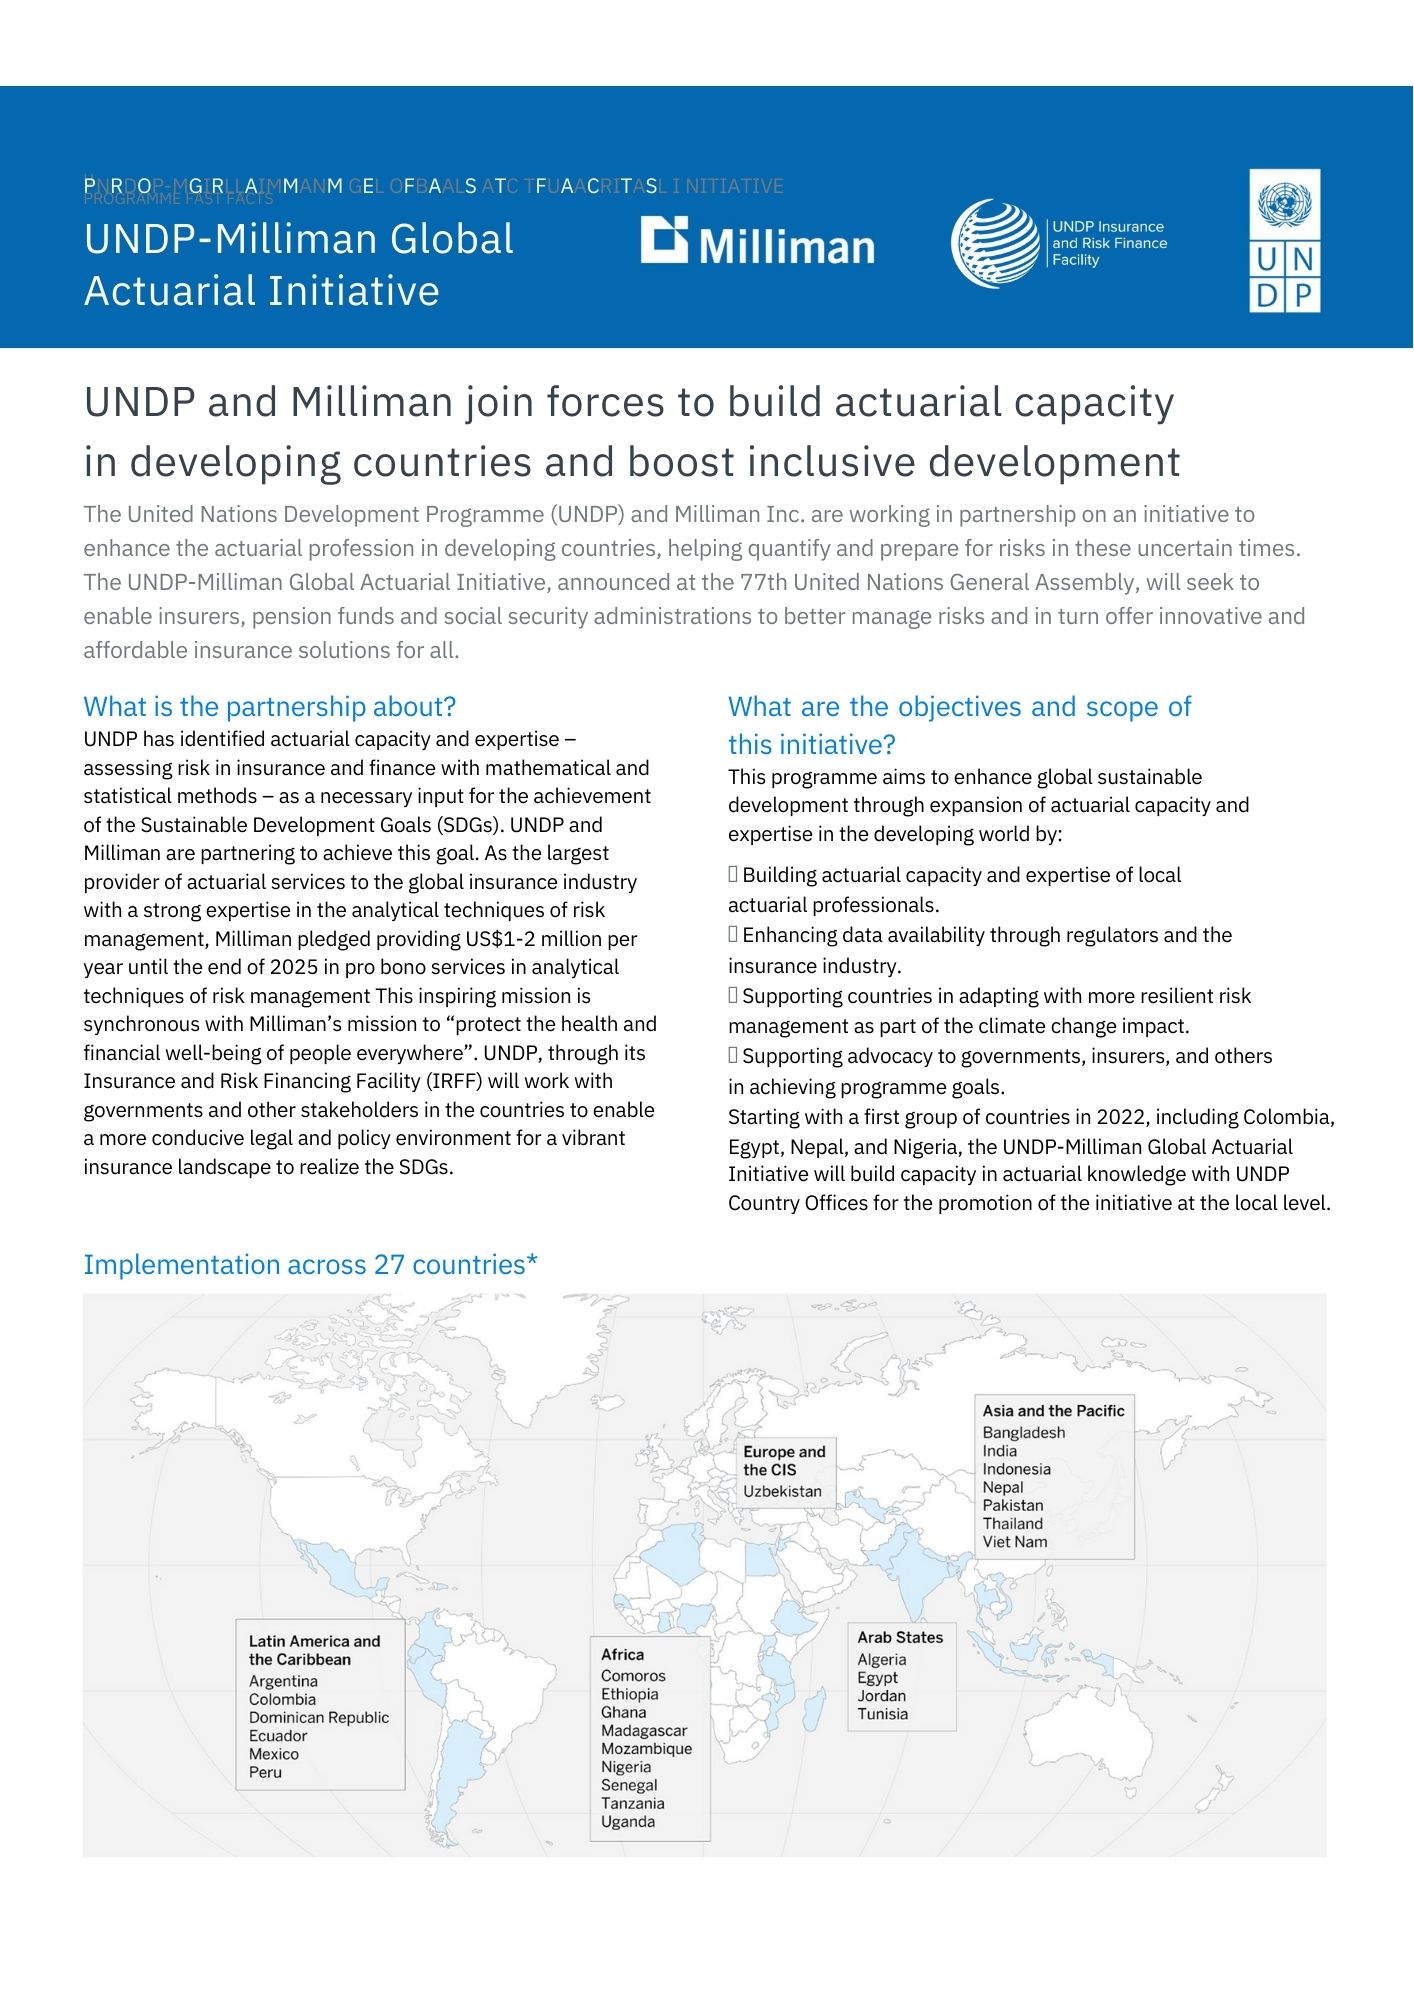 UNDP-Milliman Global  Actuarial Initiative. Programme Fast Facts